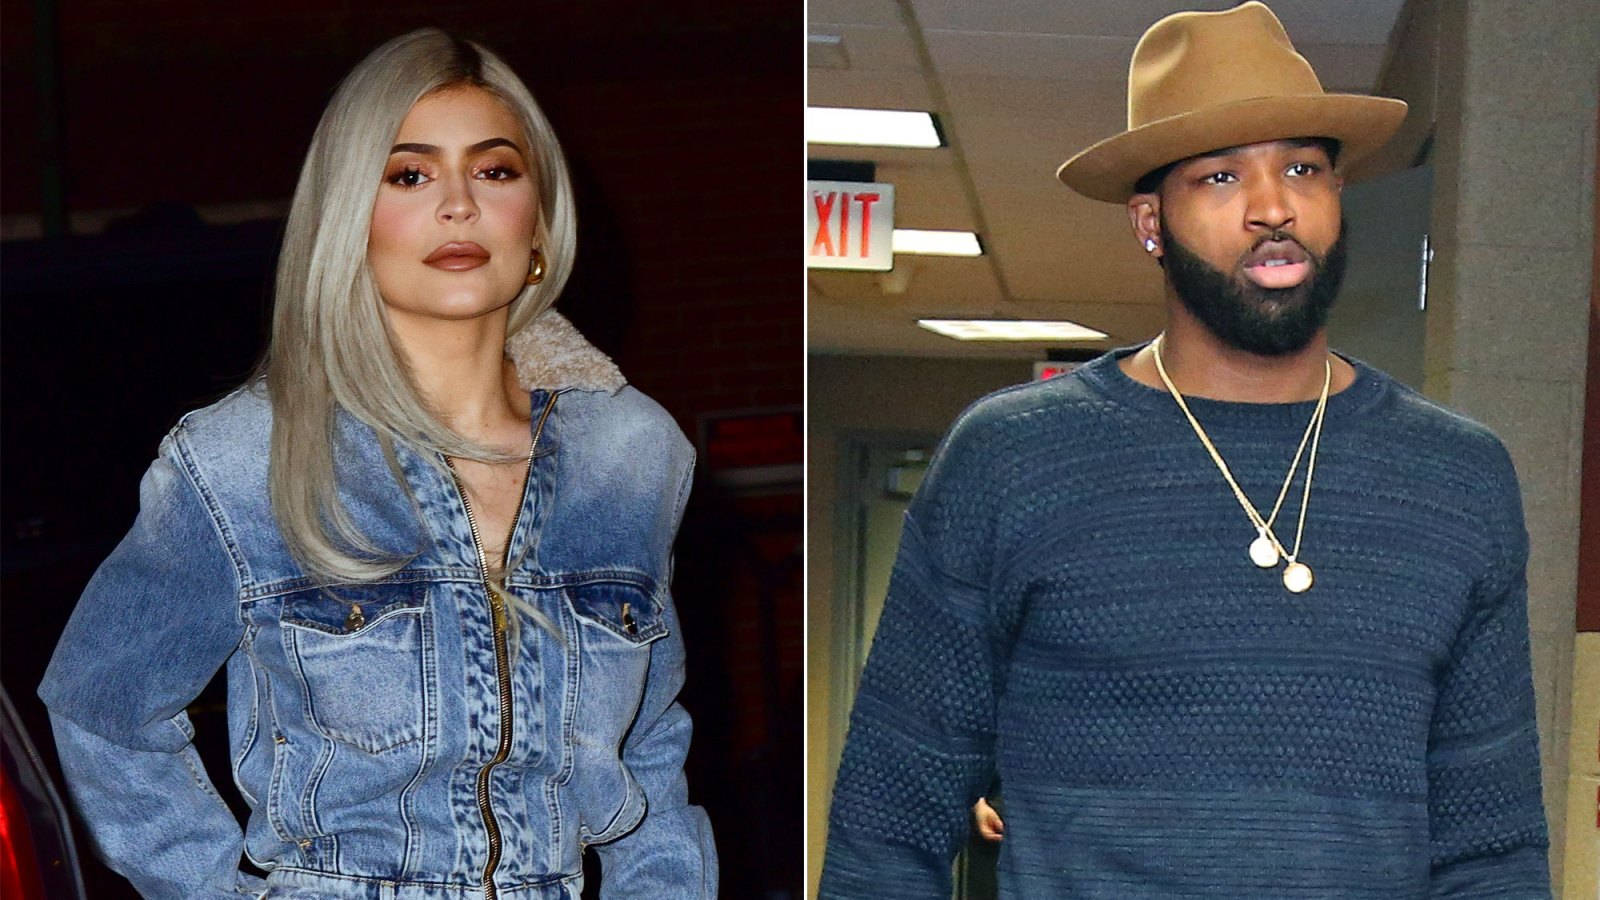 kylie jenner unfollows tristan thompson after jordyn woods cheating scandal